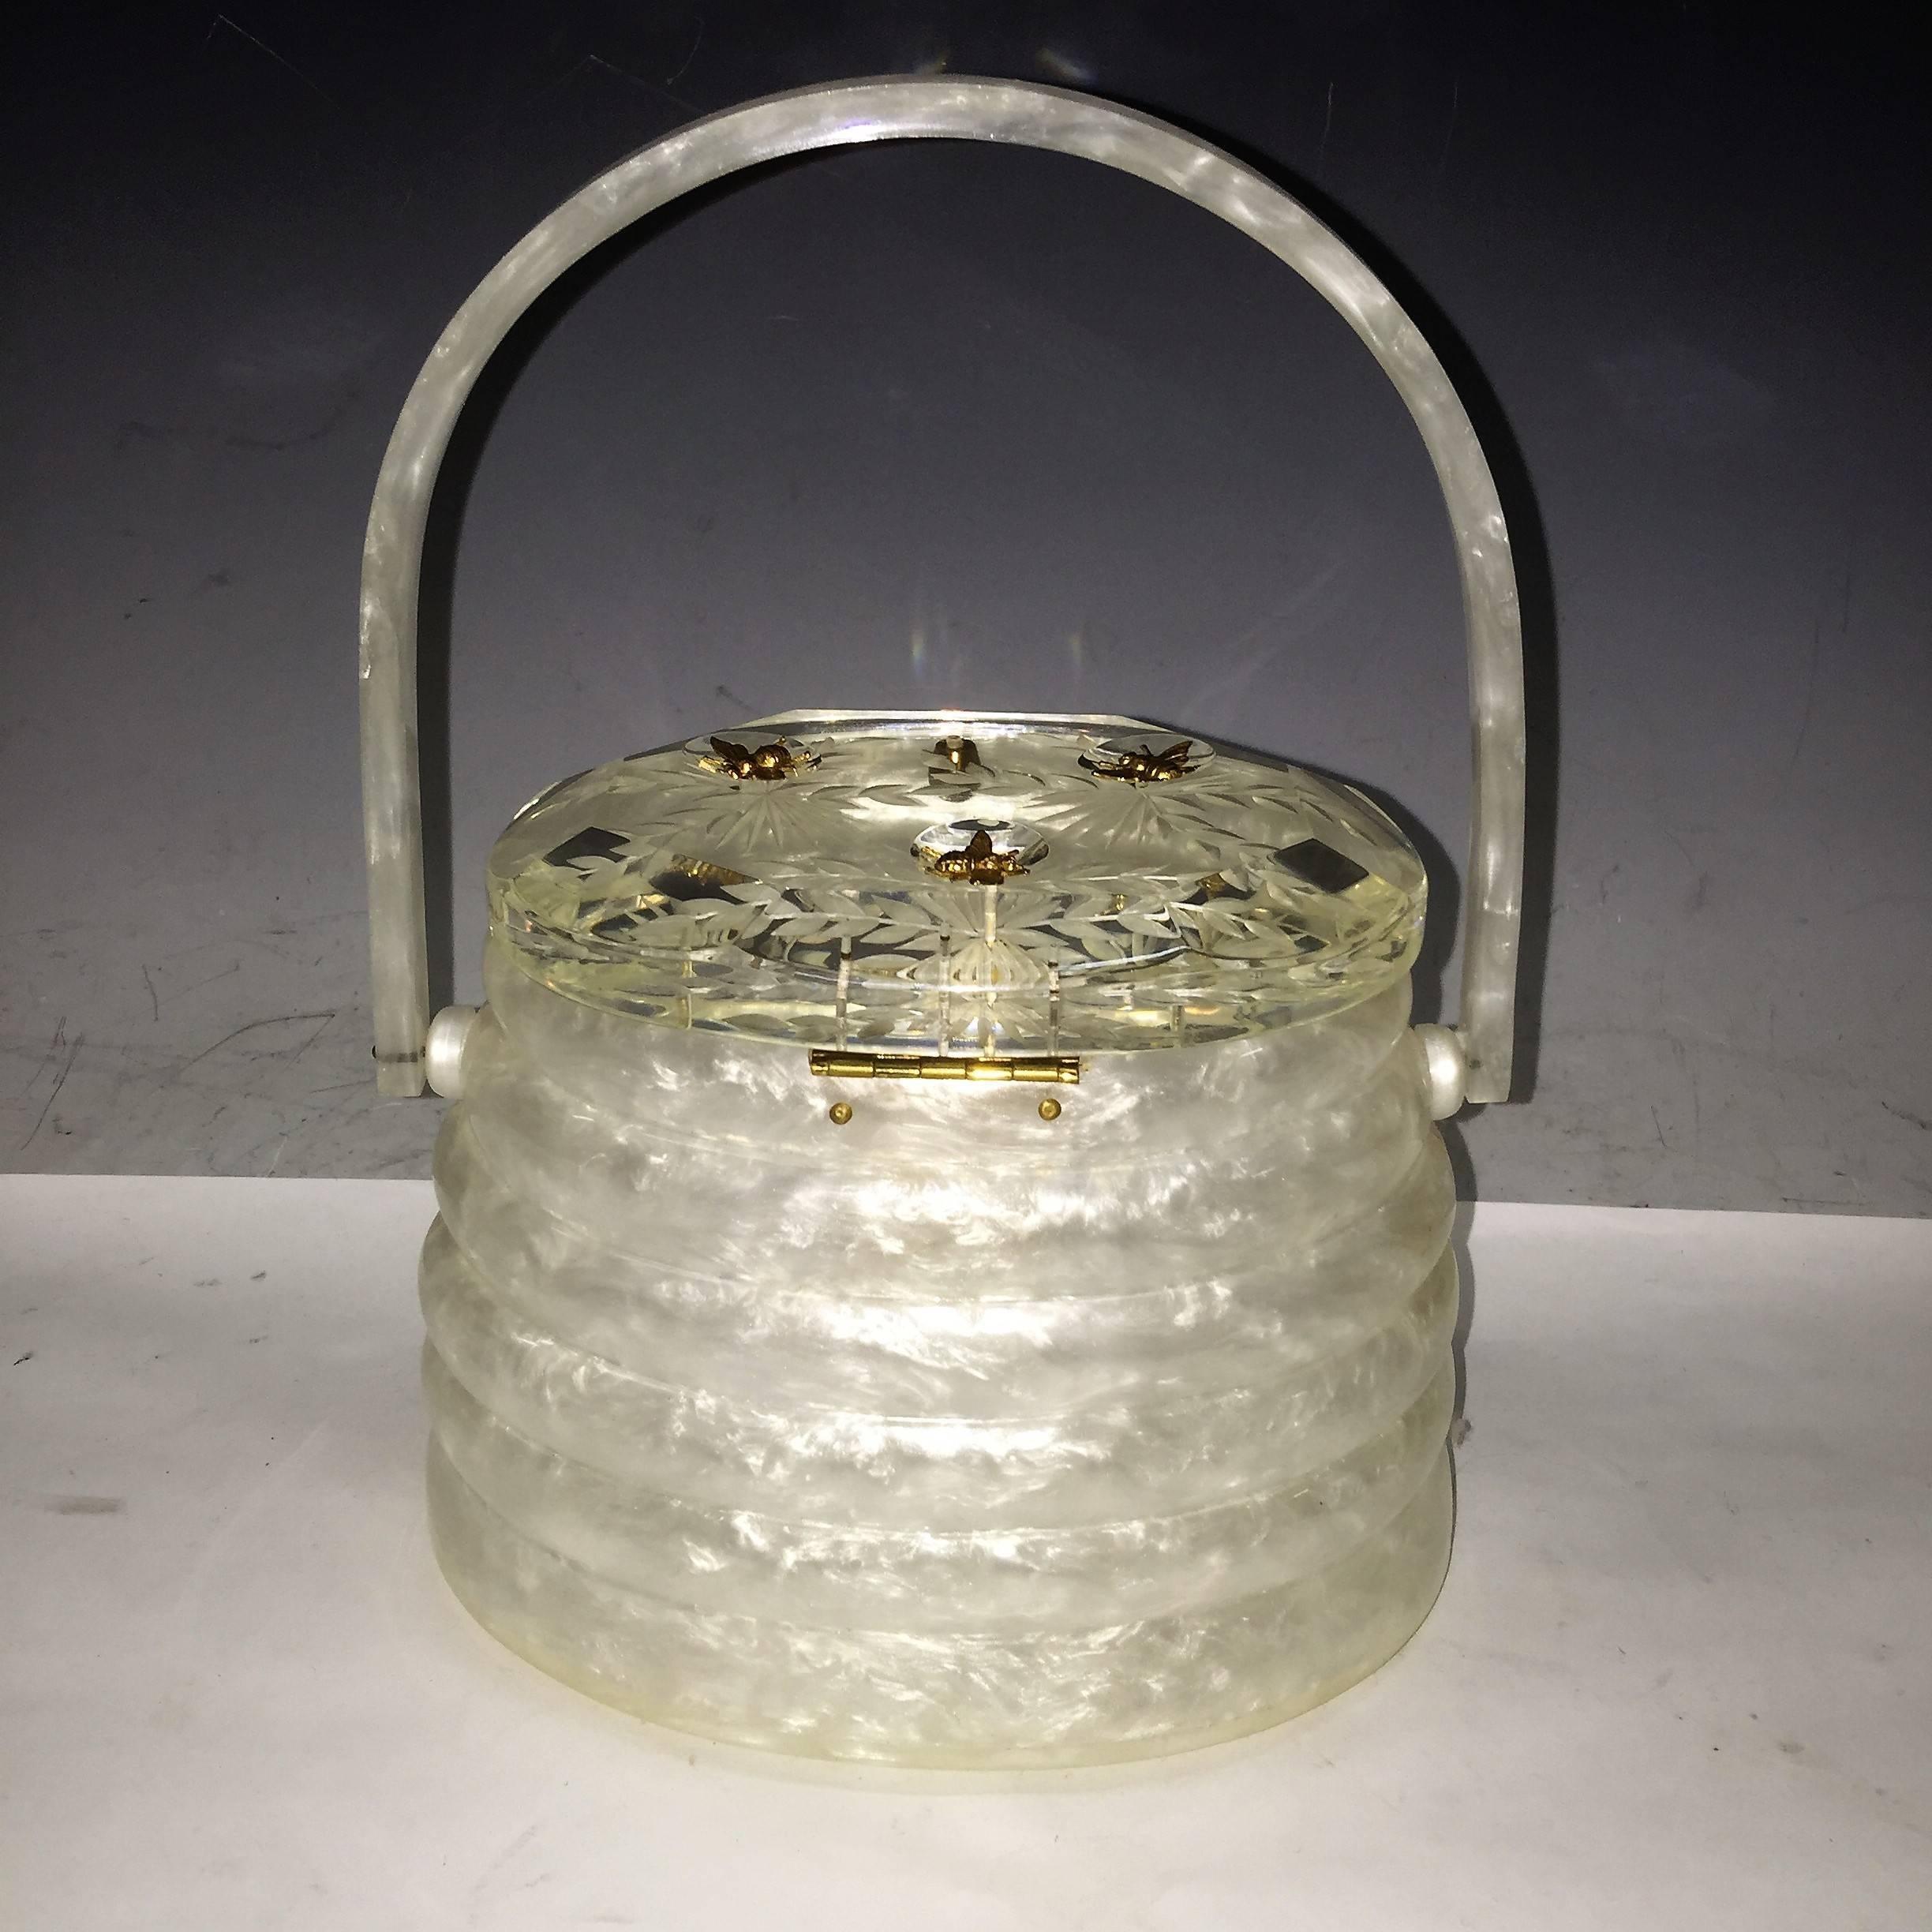 Exceptional White Pearlized Beehive Lucite Handbag with Goldtone Bees 2